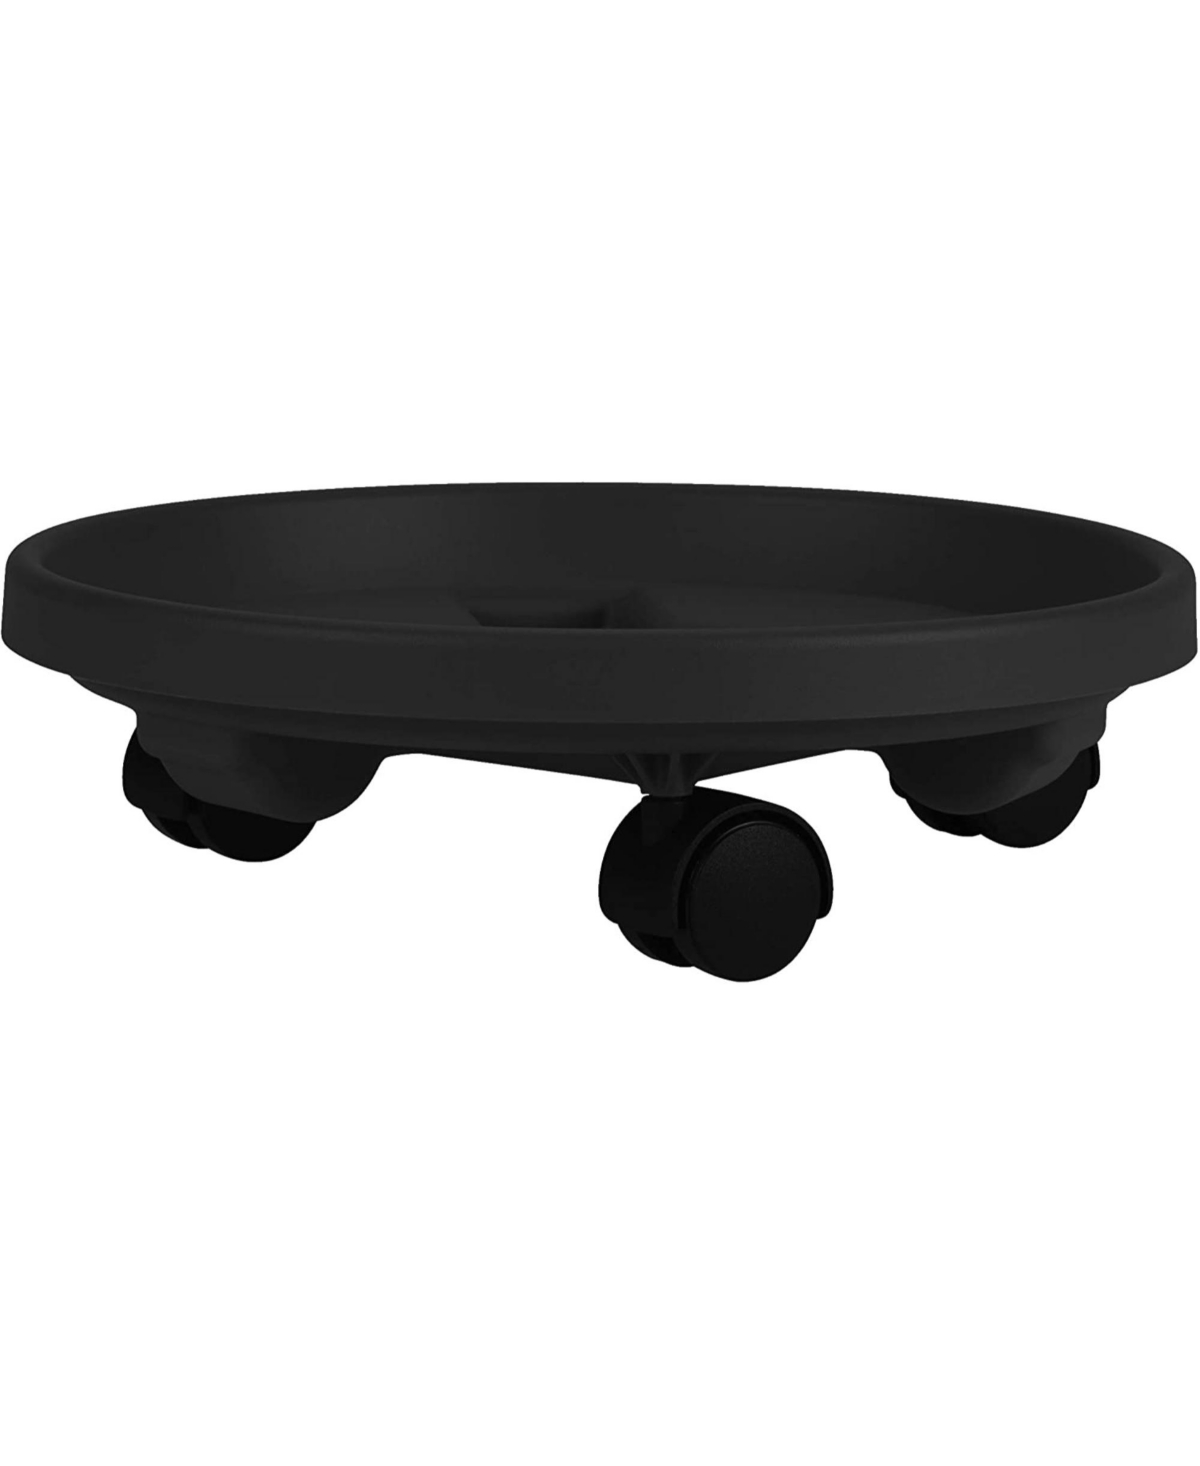 Plant Caddie With Saucer Tray and Wheels, Round, Black 14in - Black